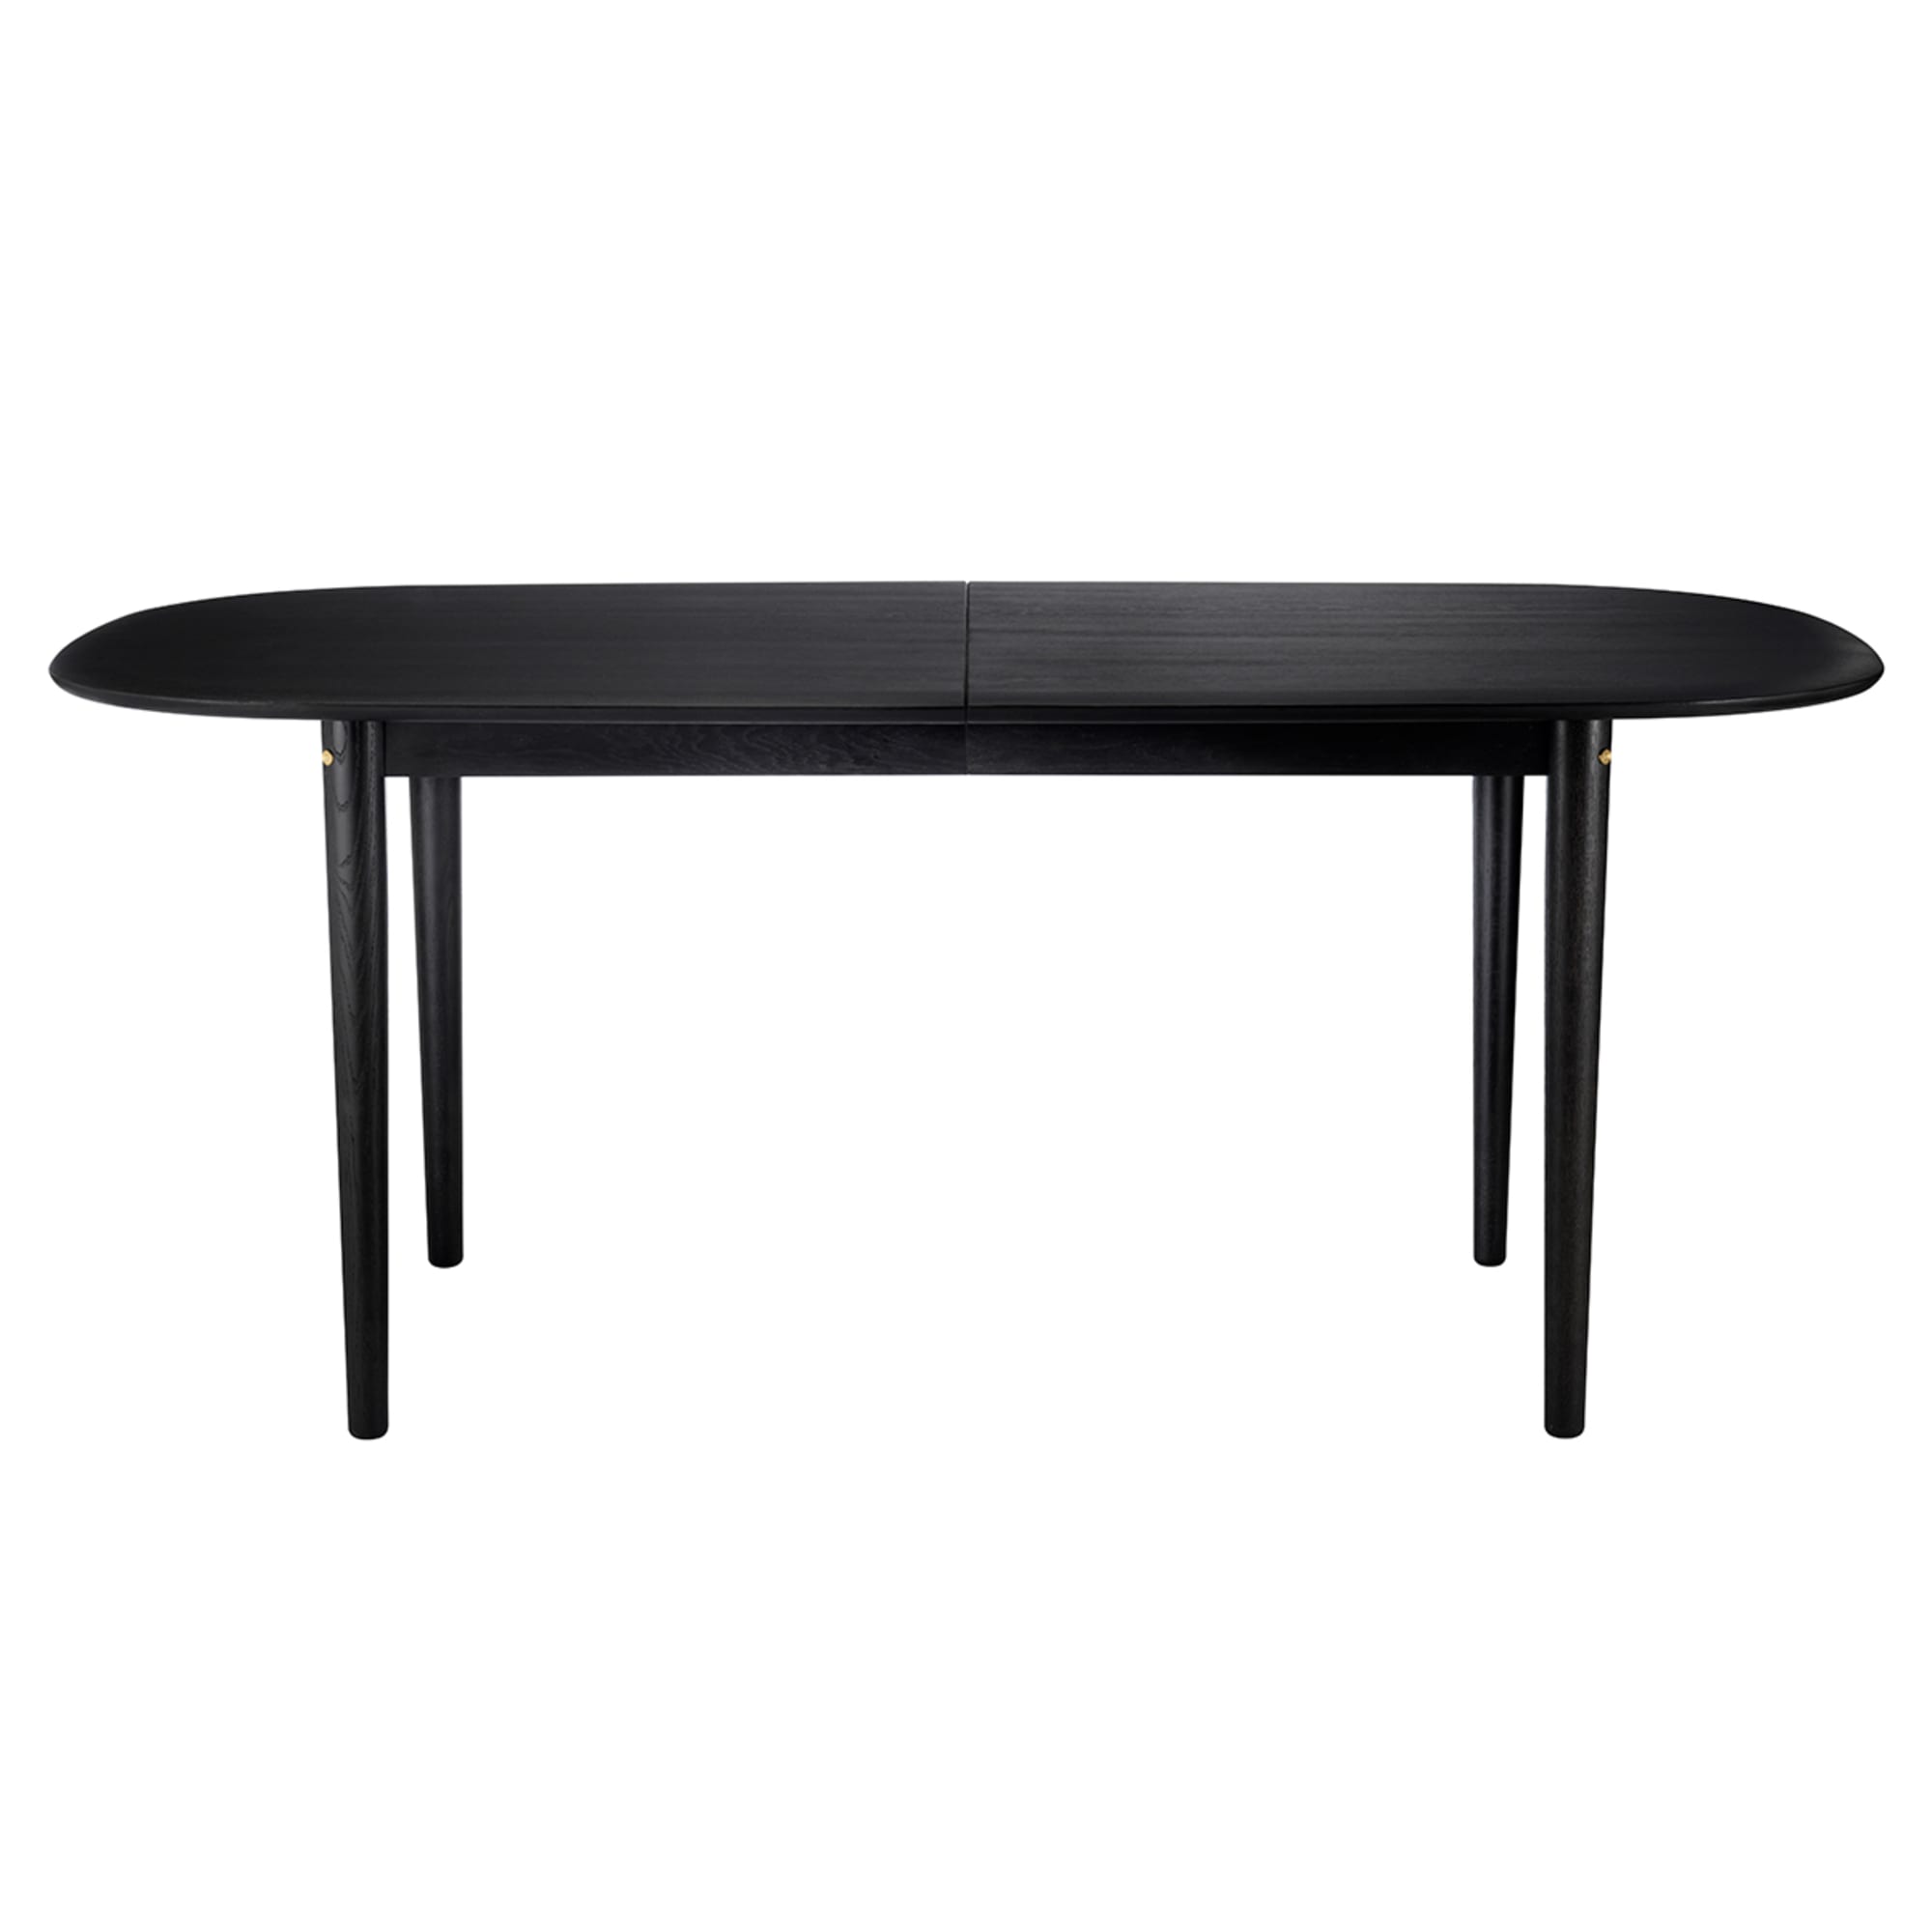 Fdb Møbler C63 E Dining Table With Pull Out Function, Black Oak